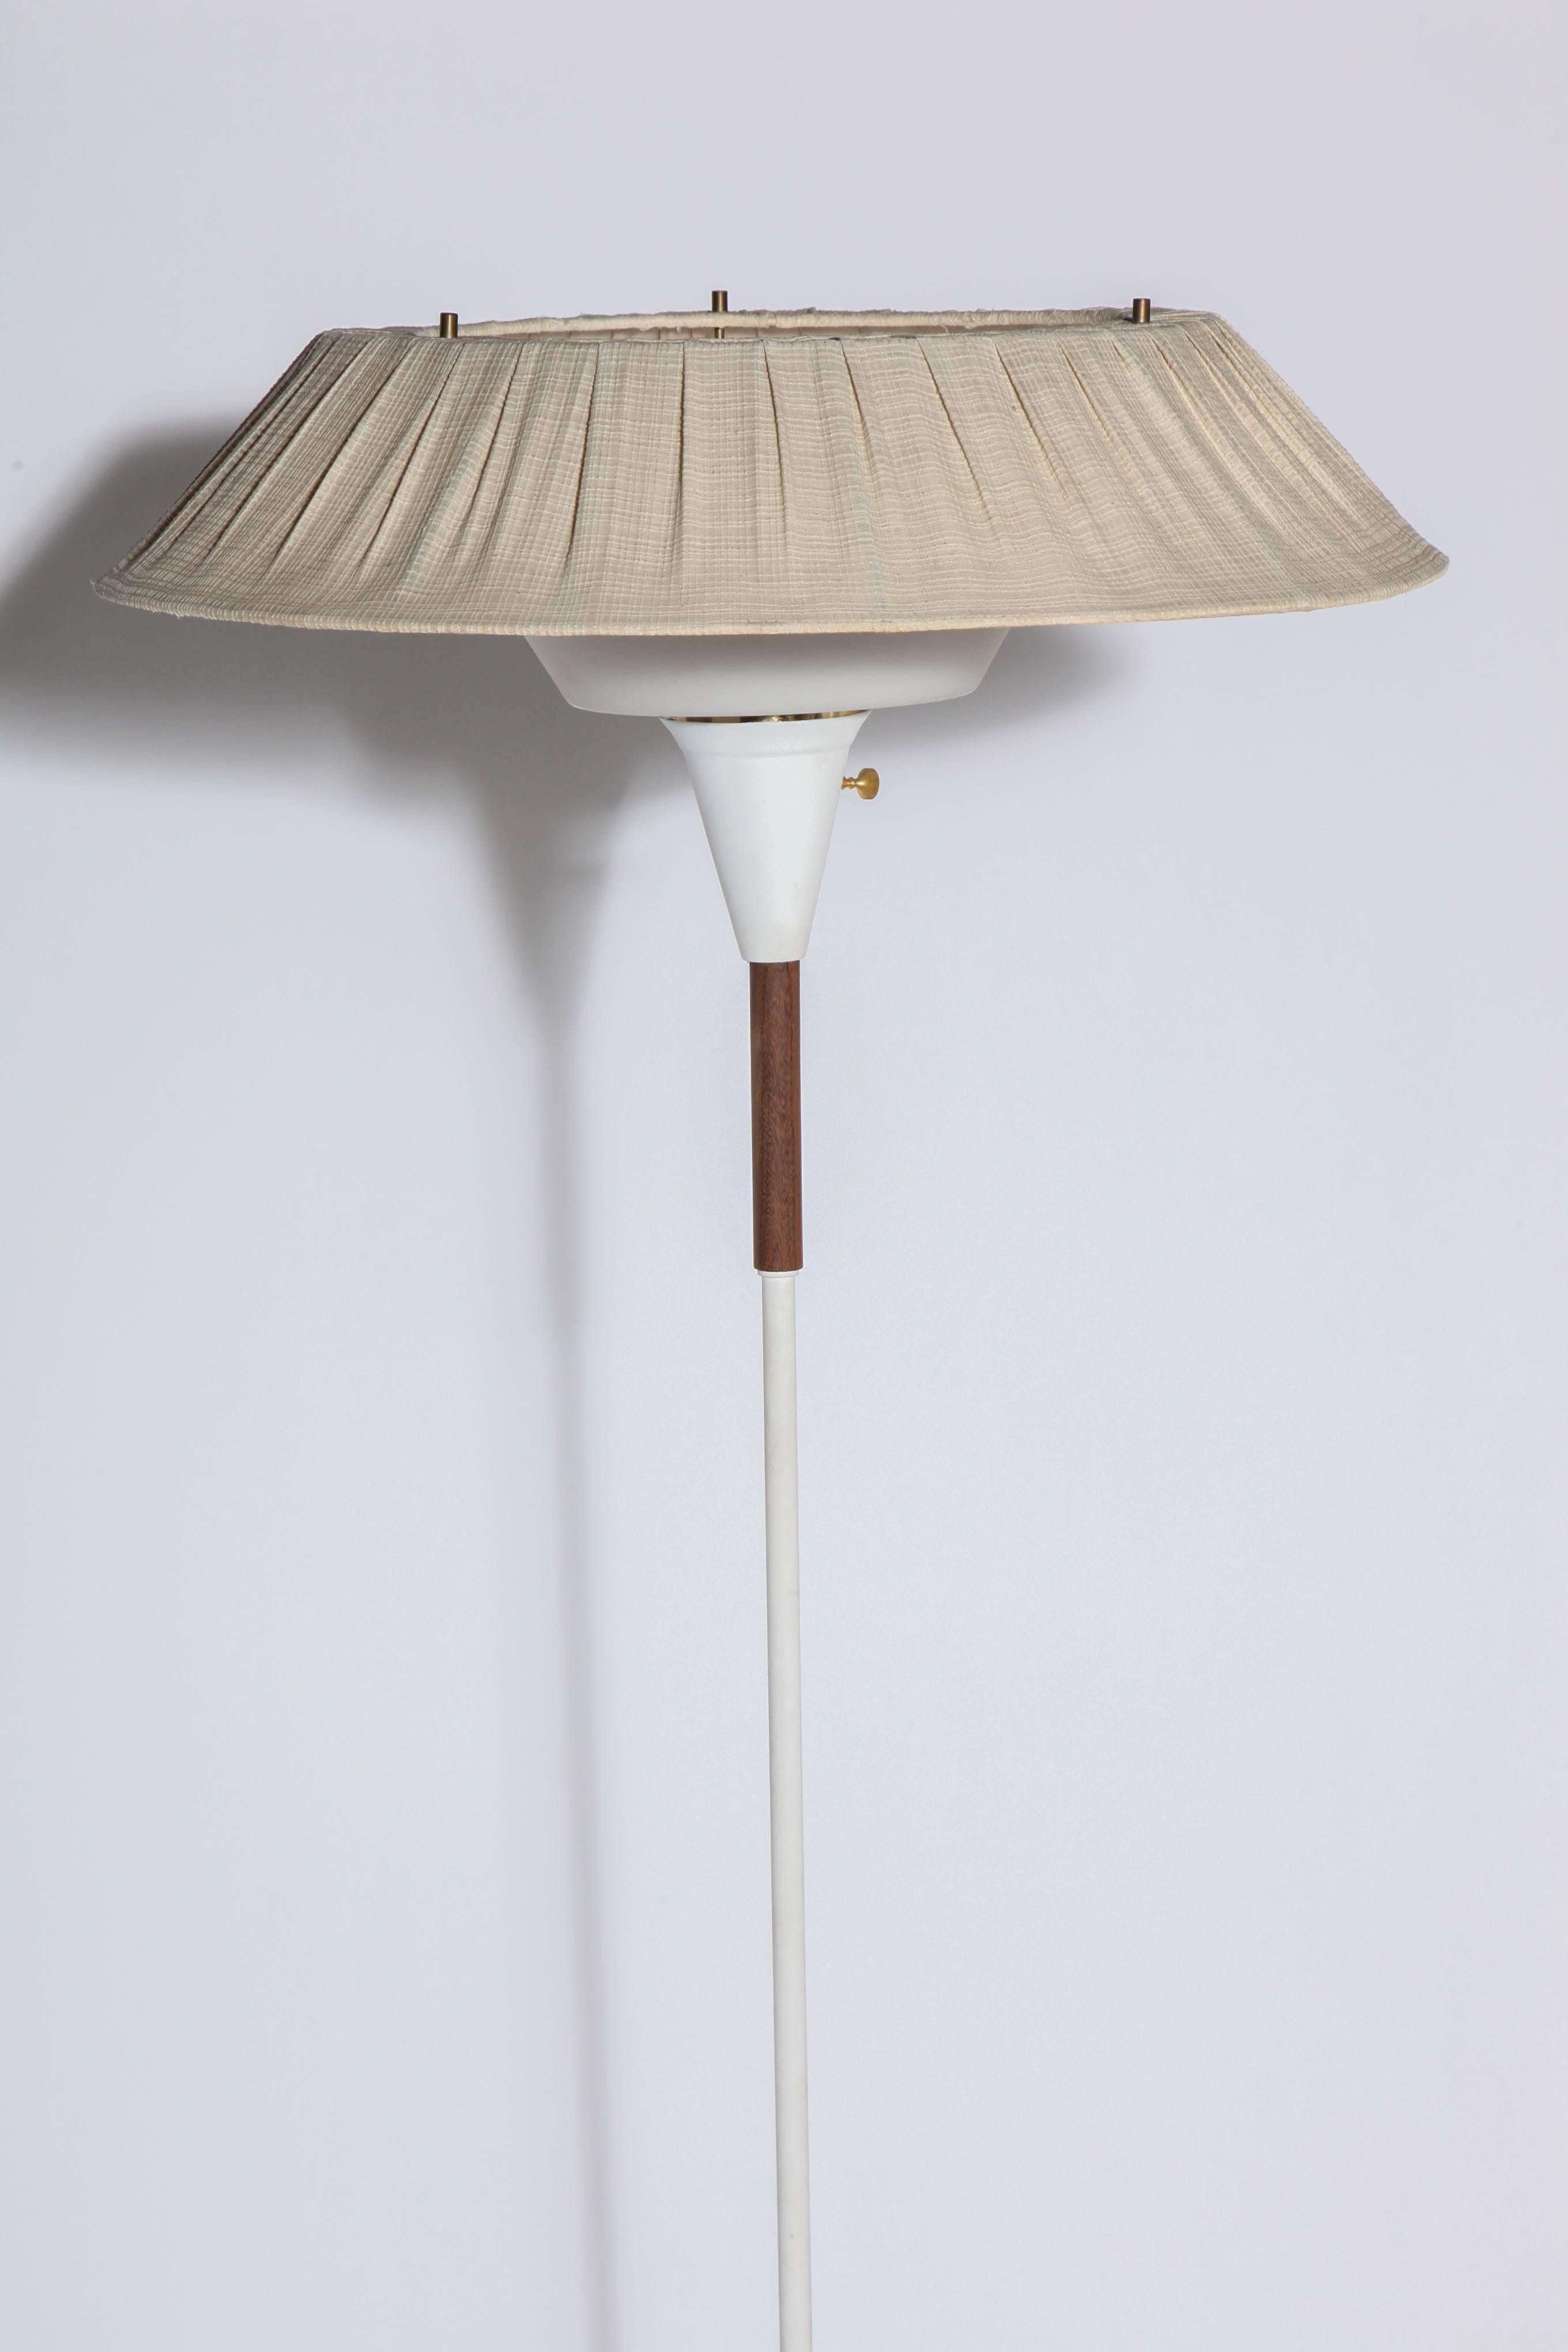 Gerald Thurston style Double Shade Reading Floor Lamp in Walnut & White Enamel with Brass accents. Featuring a White enameled tubular metal column, cone neck, Walnut handle detail and 2 lampshades. INNER SHADE: partially exposed wide translucent